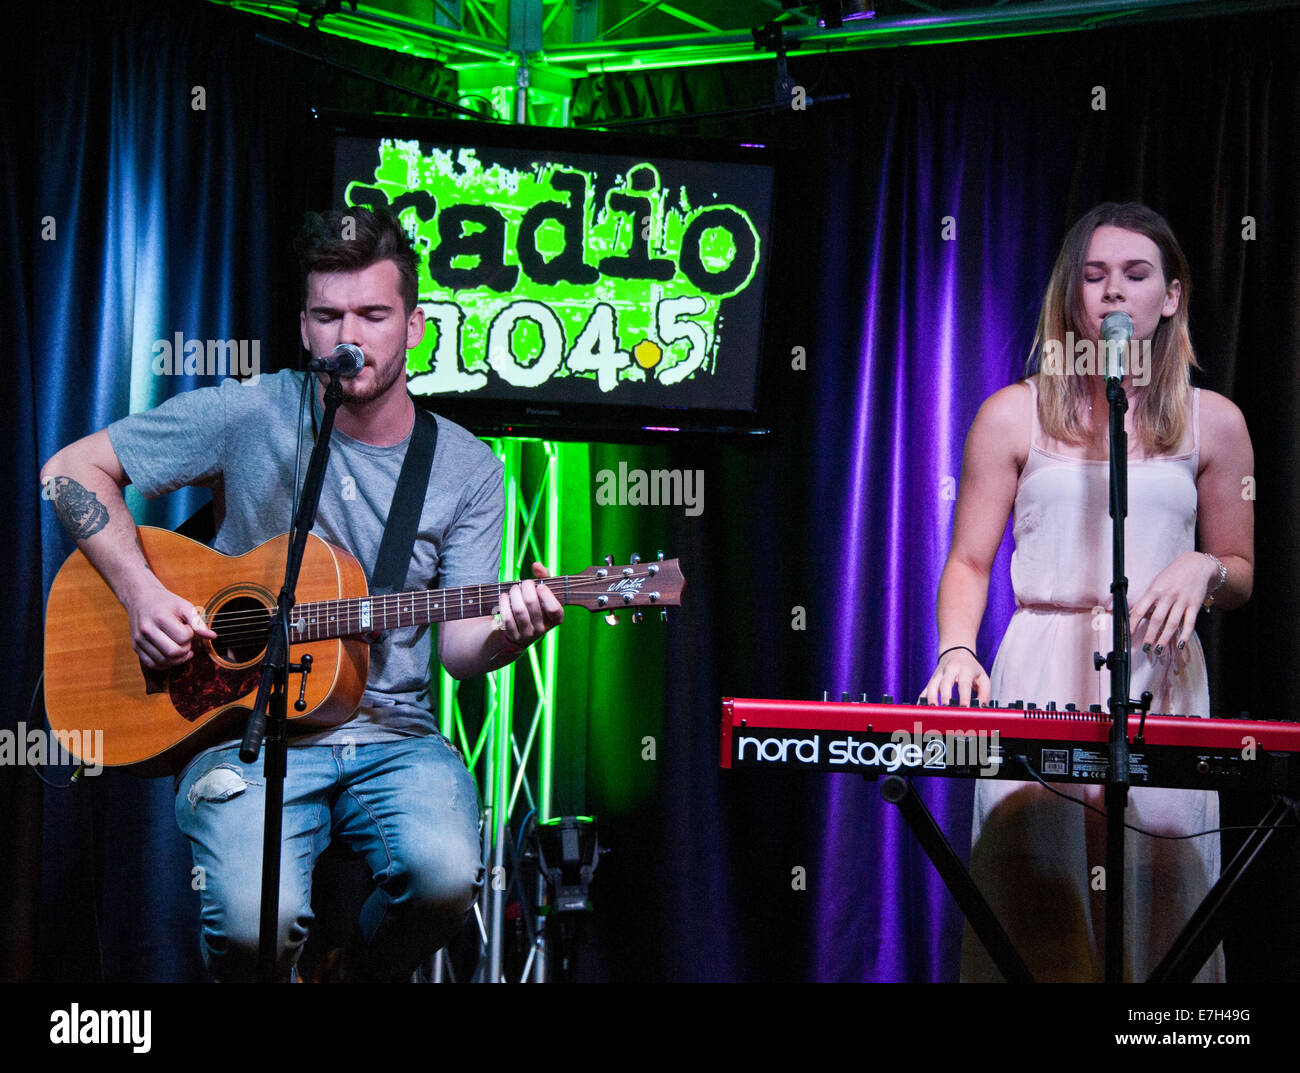 Bala Cynwyd, Pennsylvania, USA. 17th September, 2014. (L to R) Caleb Nott and Georgia Nott of New Zealand Indie Pop Duo Broods Perform at Radio 104.5's Performance Theatre on September 17, 2014 in Bala Cynwyd, Pennsylvania, United States. Credit:  Paul Froggatt/Alamy Live News Stock Photo